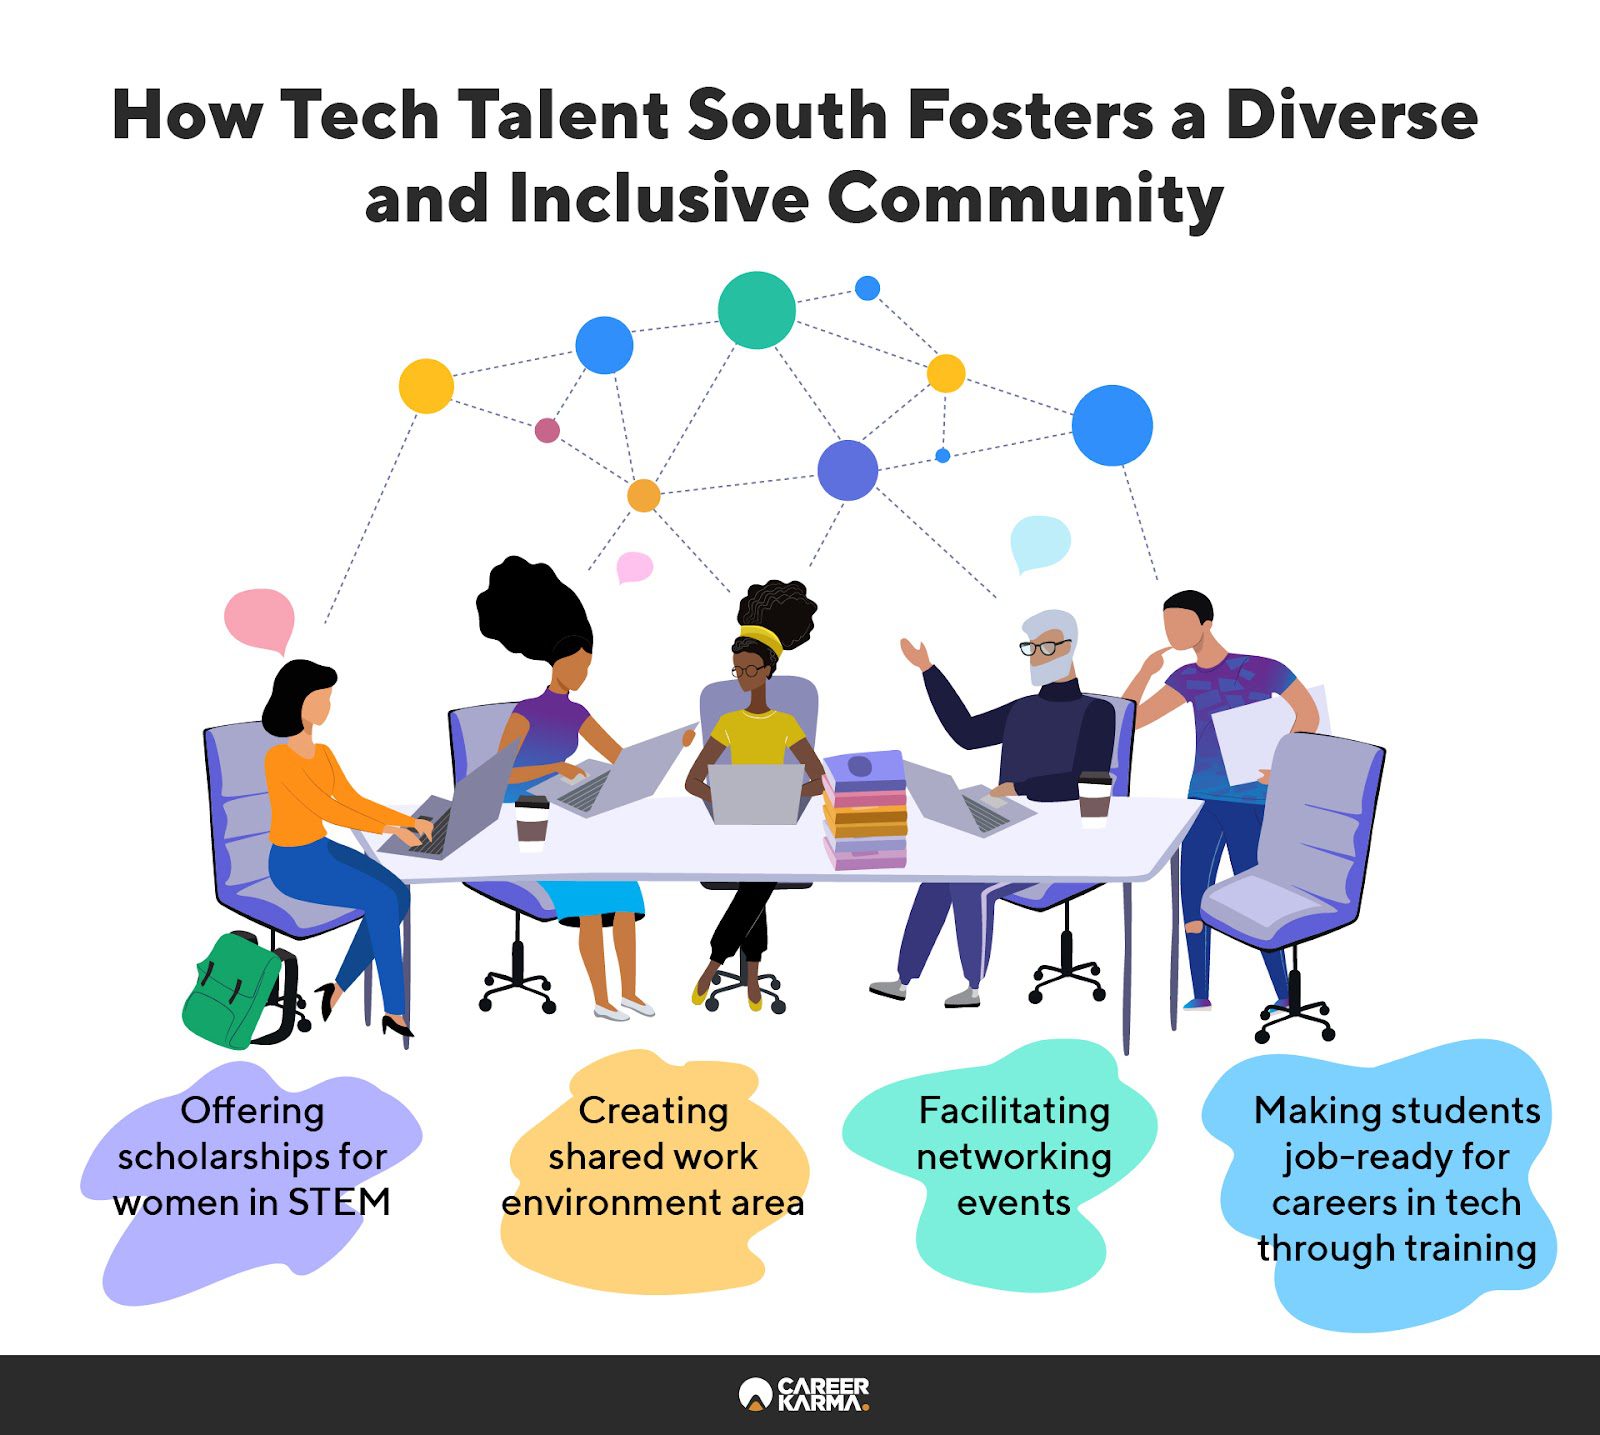 An infographic highlighting how Tech Talent South fosters diversity and inclusion in tech